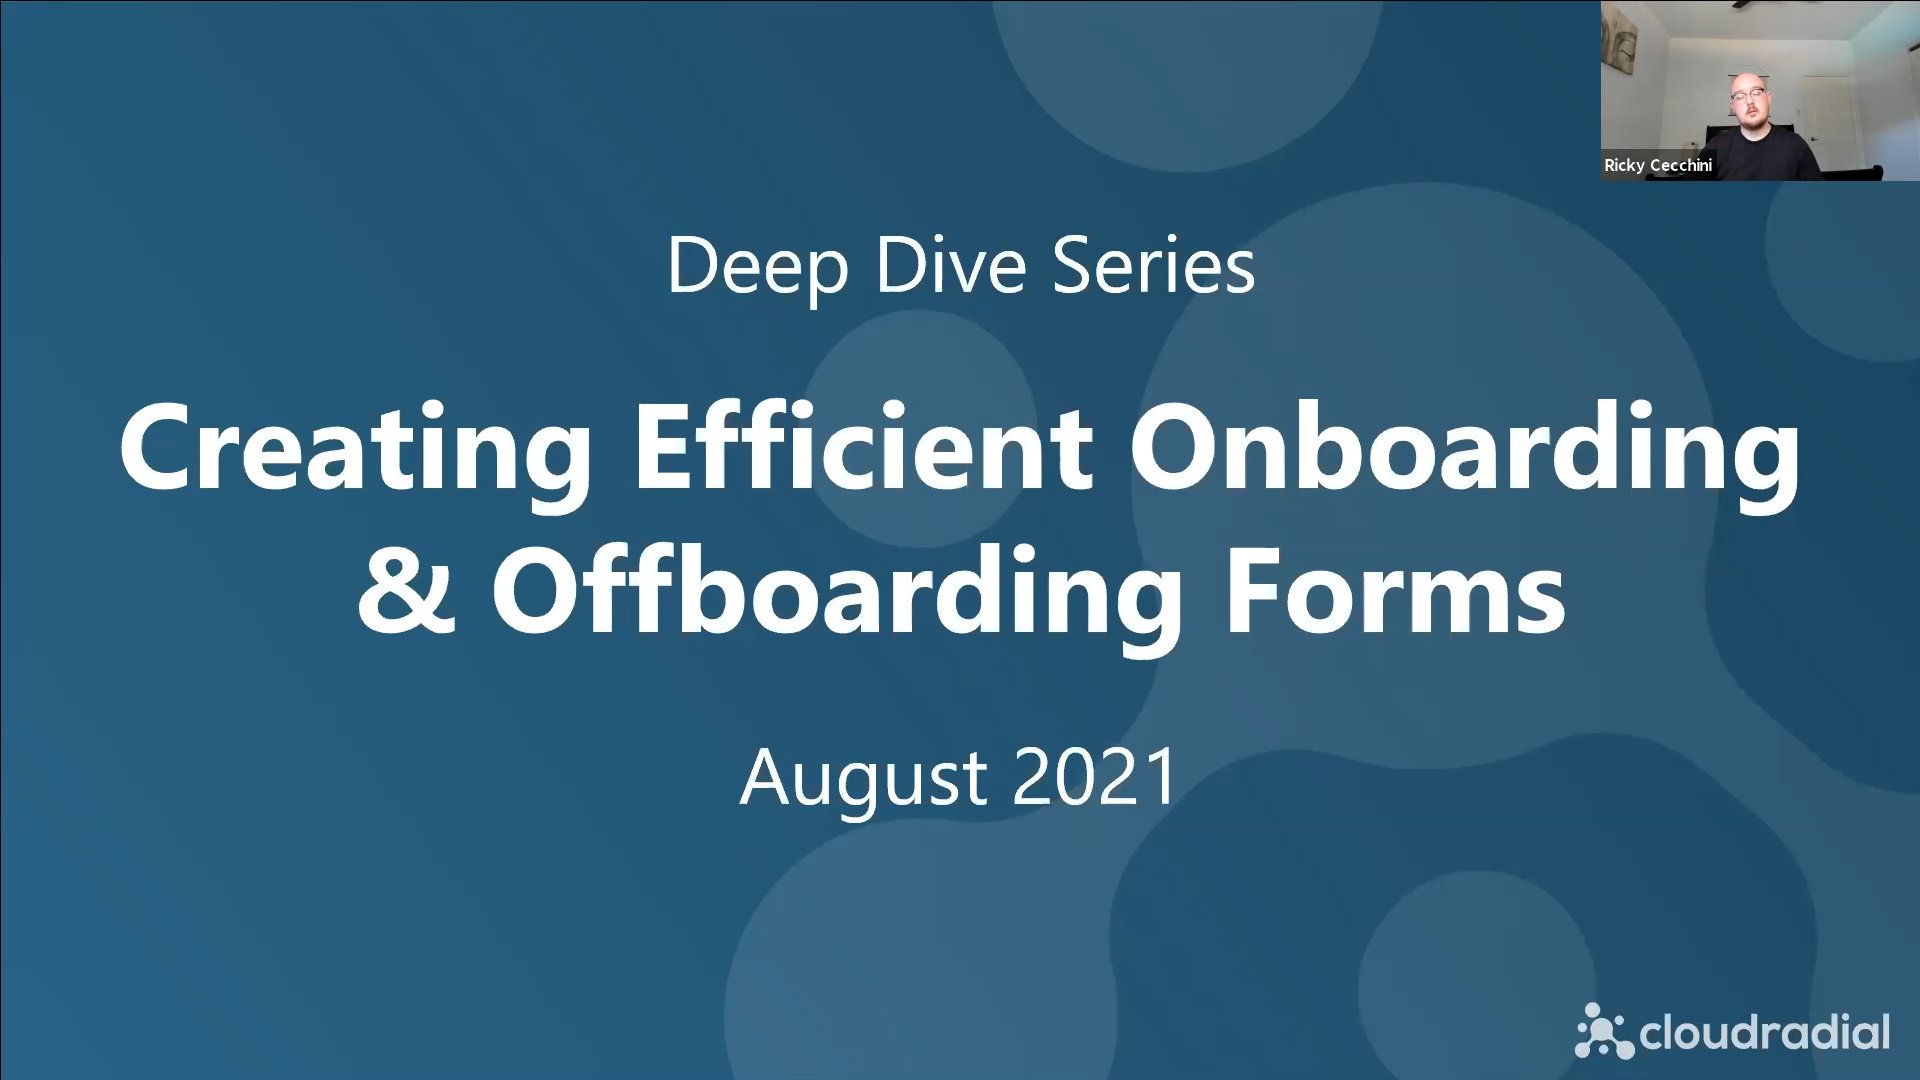 Deep Dive -Creating Efficient Onboarding and Offboarding Forms